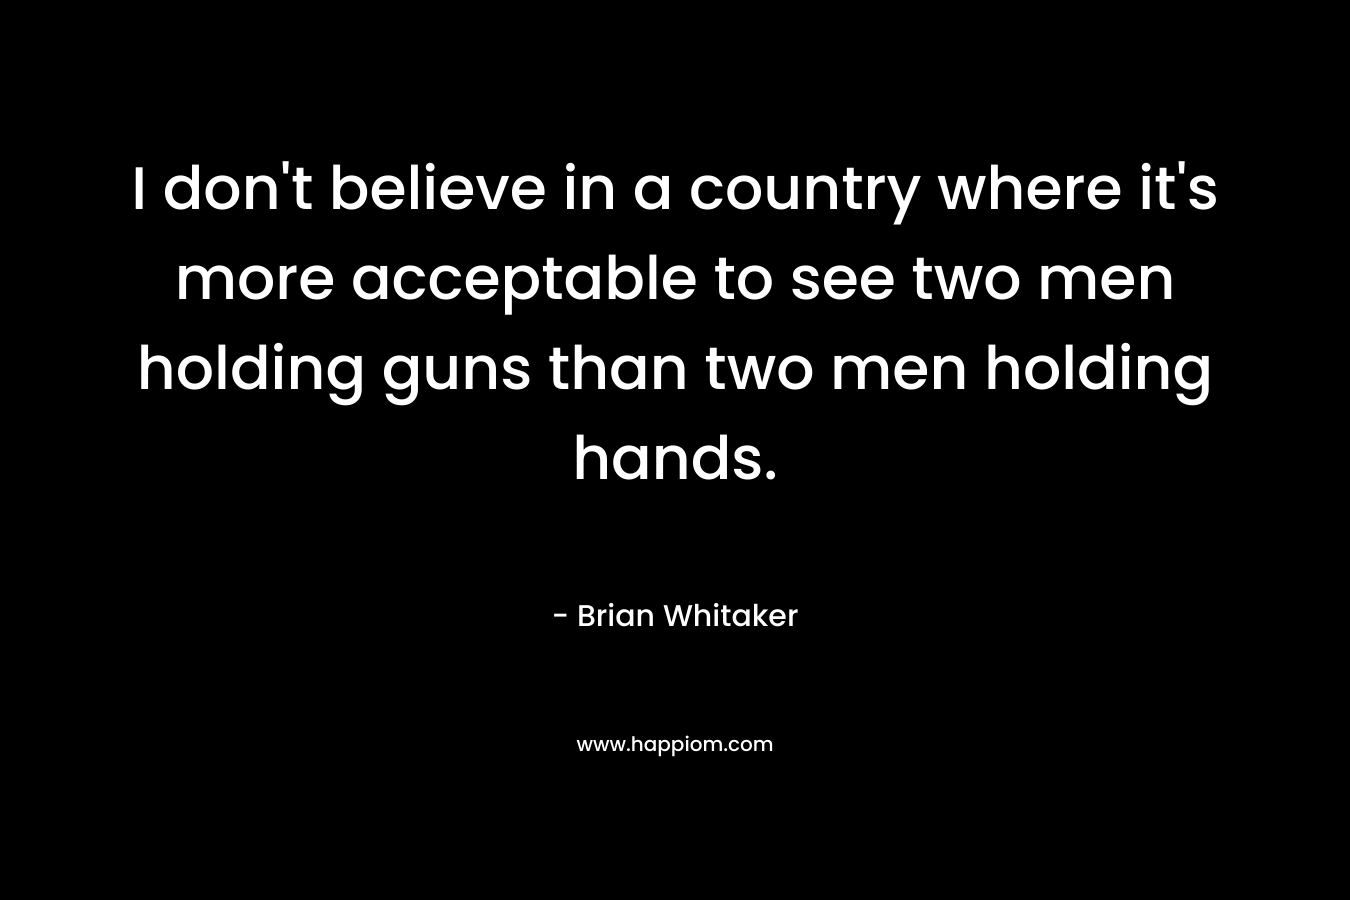 I don't believe in a country where it's more acceptable to see two men holding guns than two men holding hands.